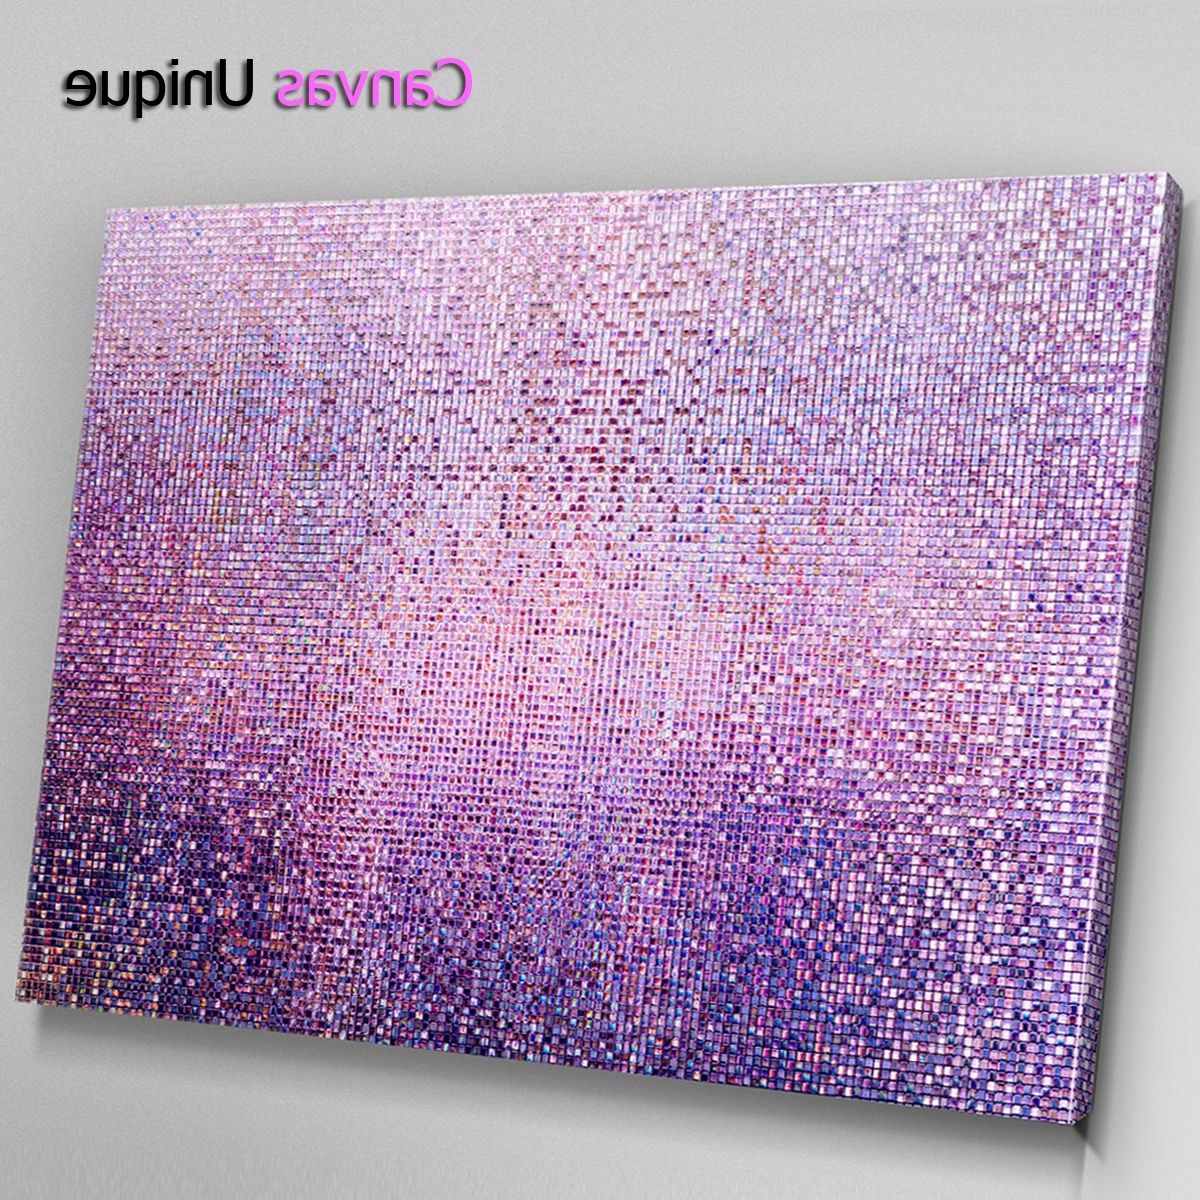 Well Known Tile Canvas Wall Art Regarding Ab1412 Pink Blue Mosaic Tiles Abstract Wall Art Picture Large Canvas (View 19 of 20)